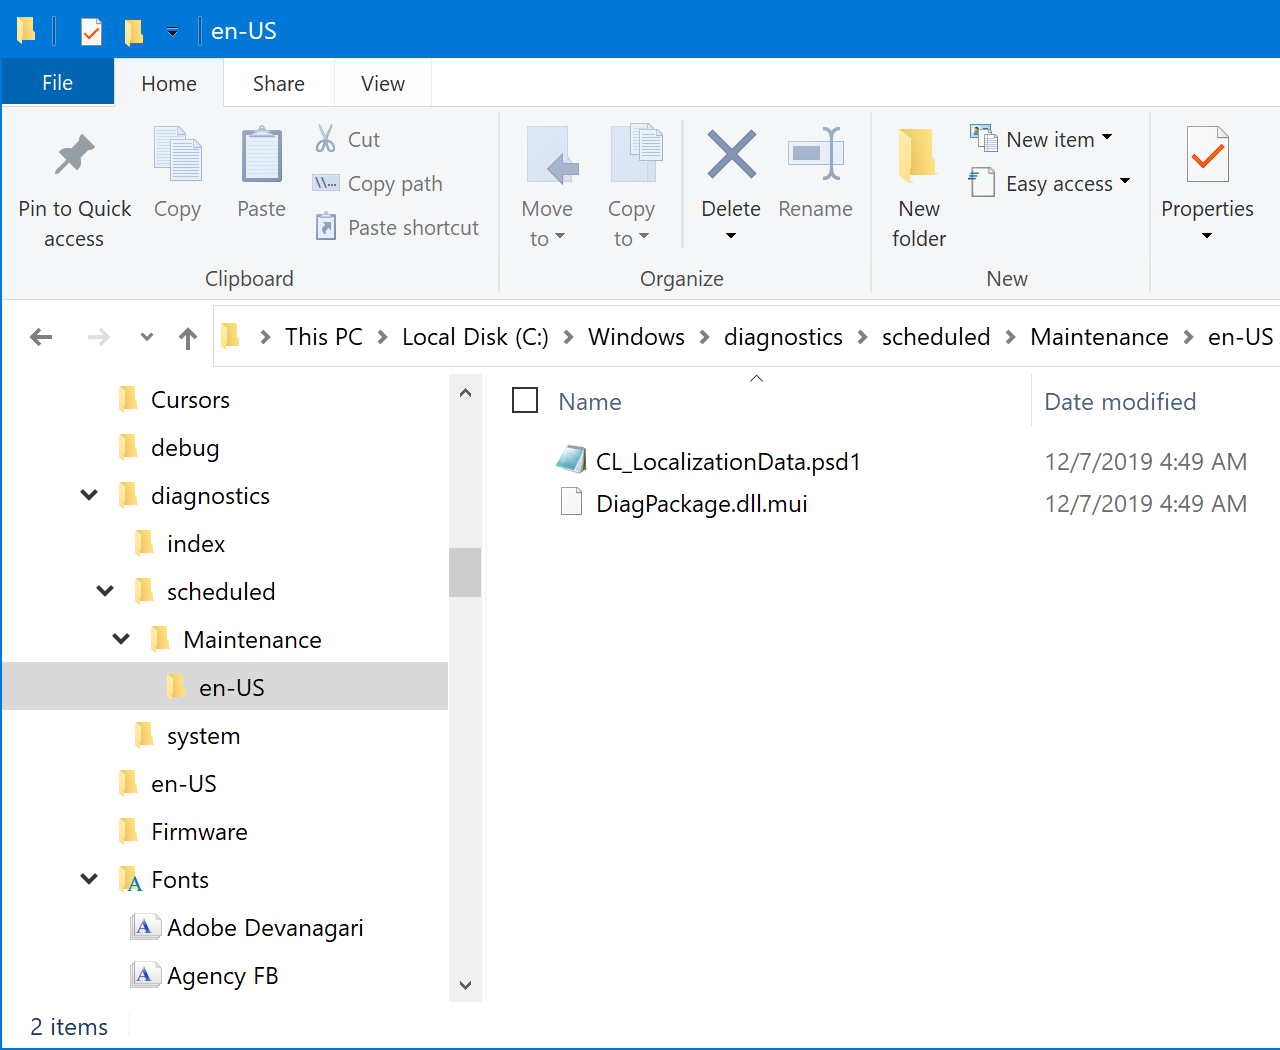 A Windows 10 file explorer window. It is set to show a tree view on the left and a detail view on the right. The tree view demonstrates navigating into a folder seven levels deep, and how other directories can also be open at the same time to show subfolders and file contents. The folder that is currently open is called, 'en-US', and is located in a file path that is, 'This PC', then 'Local Disk (C:)', then 'Windows', then 'diagnostics', then 'scheduled', then 'Maintenance'. The details view shows the file contents of the 'en-US' folder. Cropped screenshot.